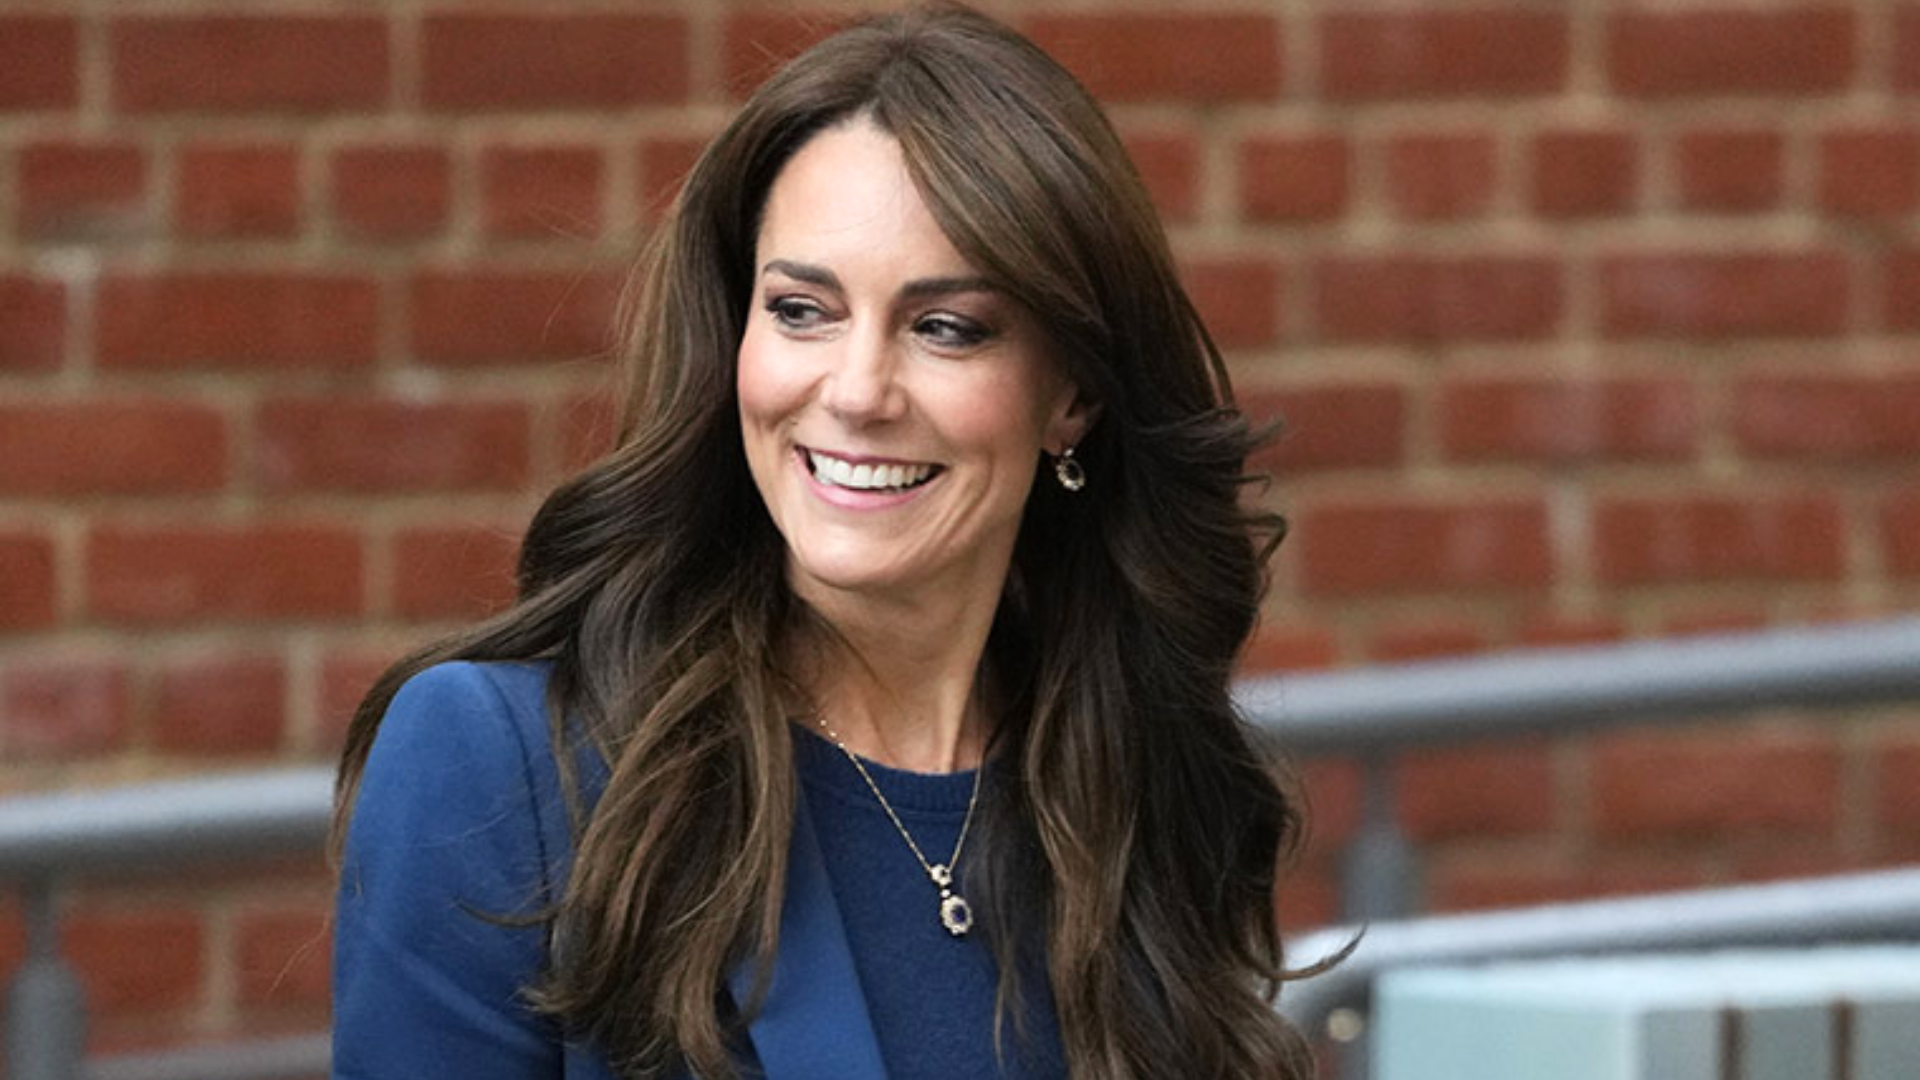 In A Major Security Breach, Hospital Staff Tried To View Kate Middleton’s Private Medical Records: Reports